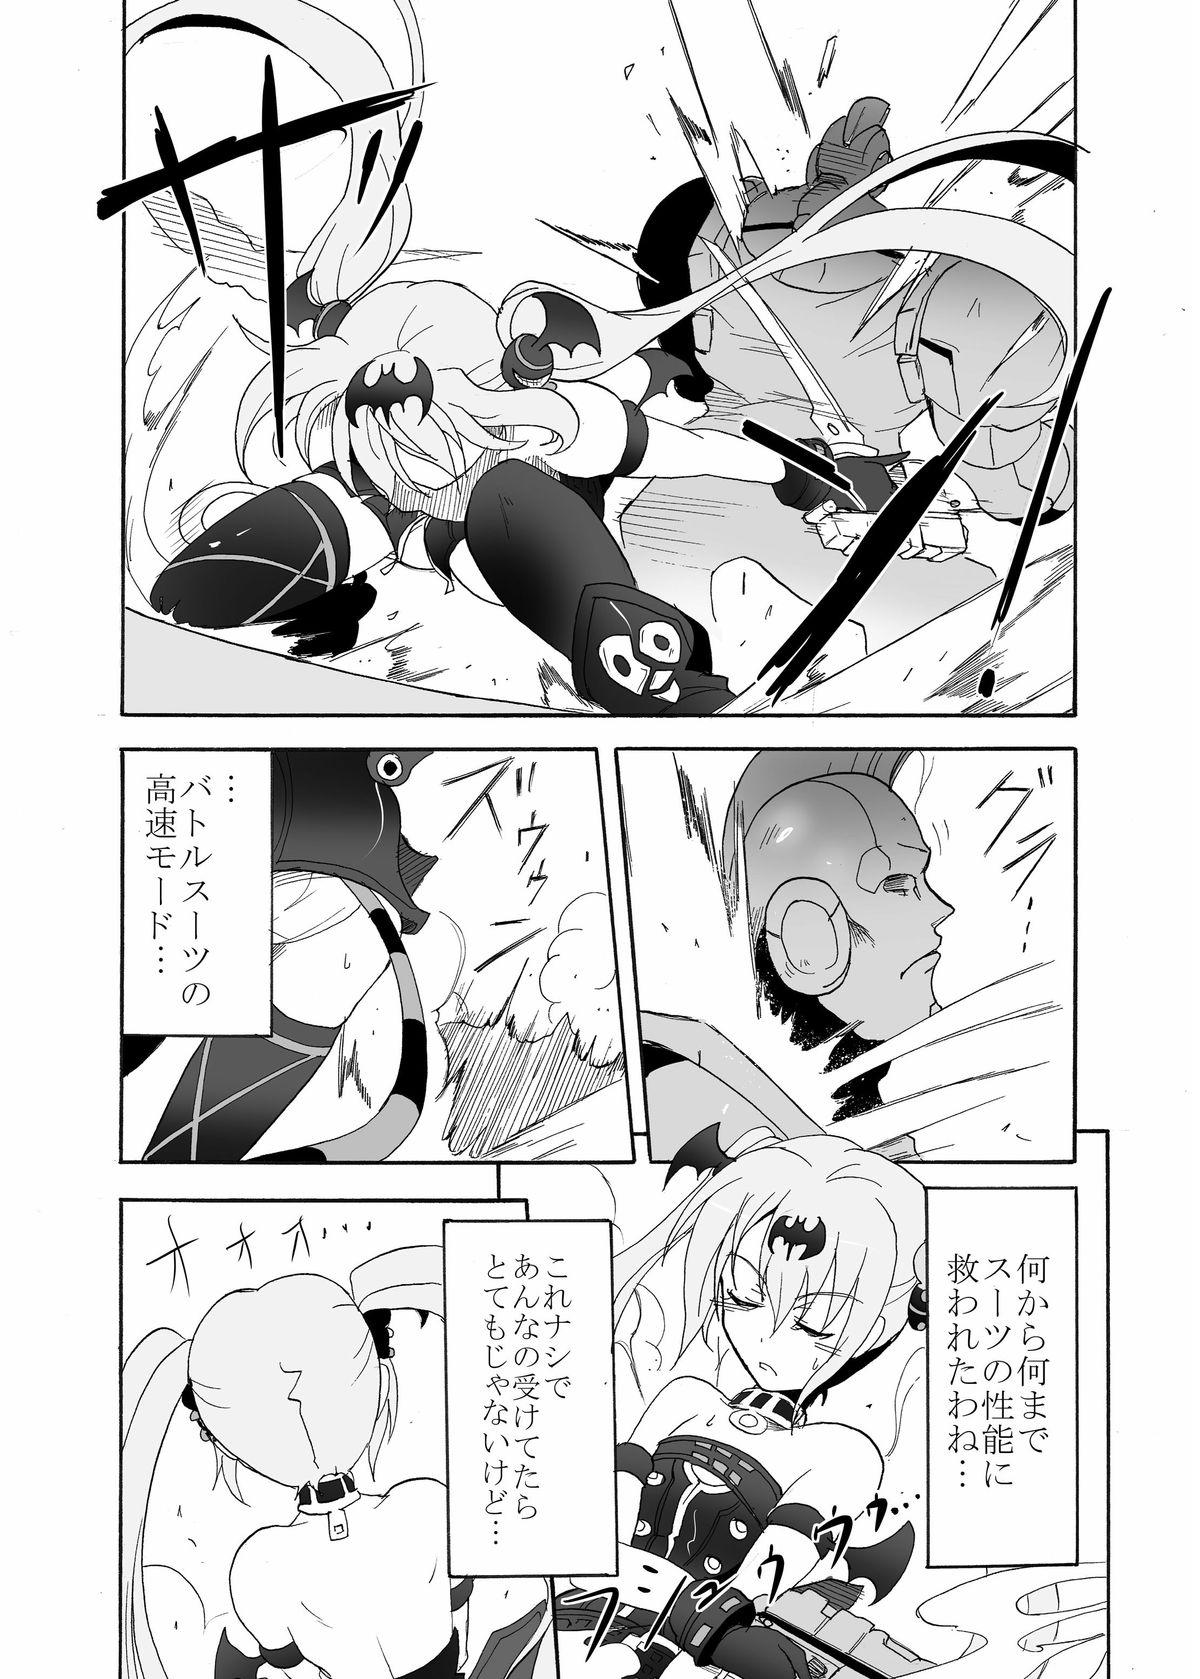 India SPIRAL BLOW! - Queens blade And - Page 10